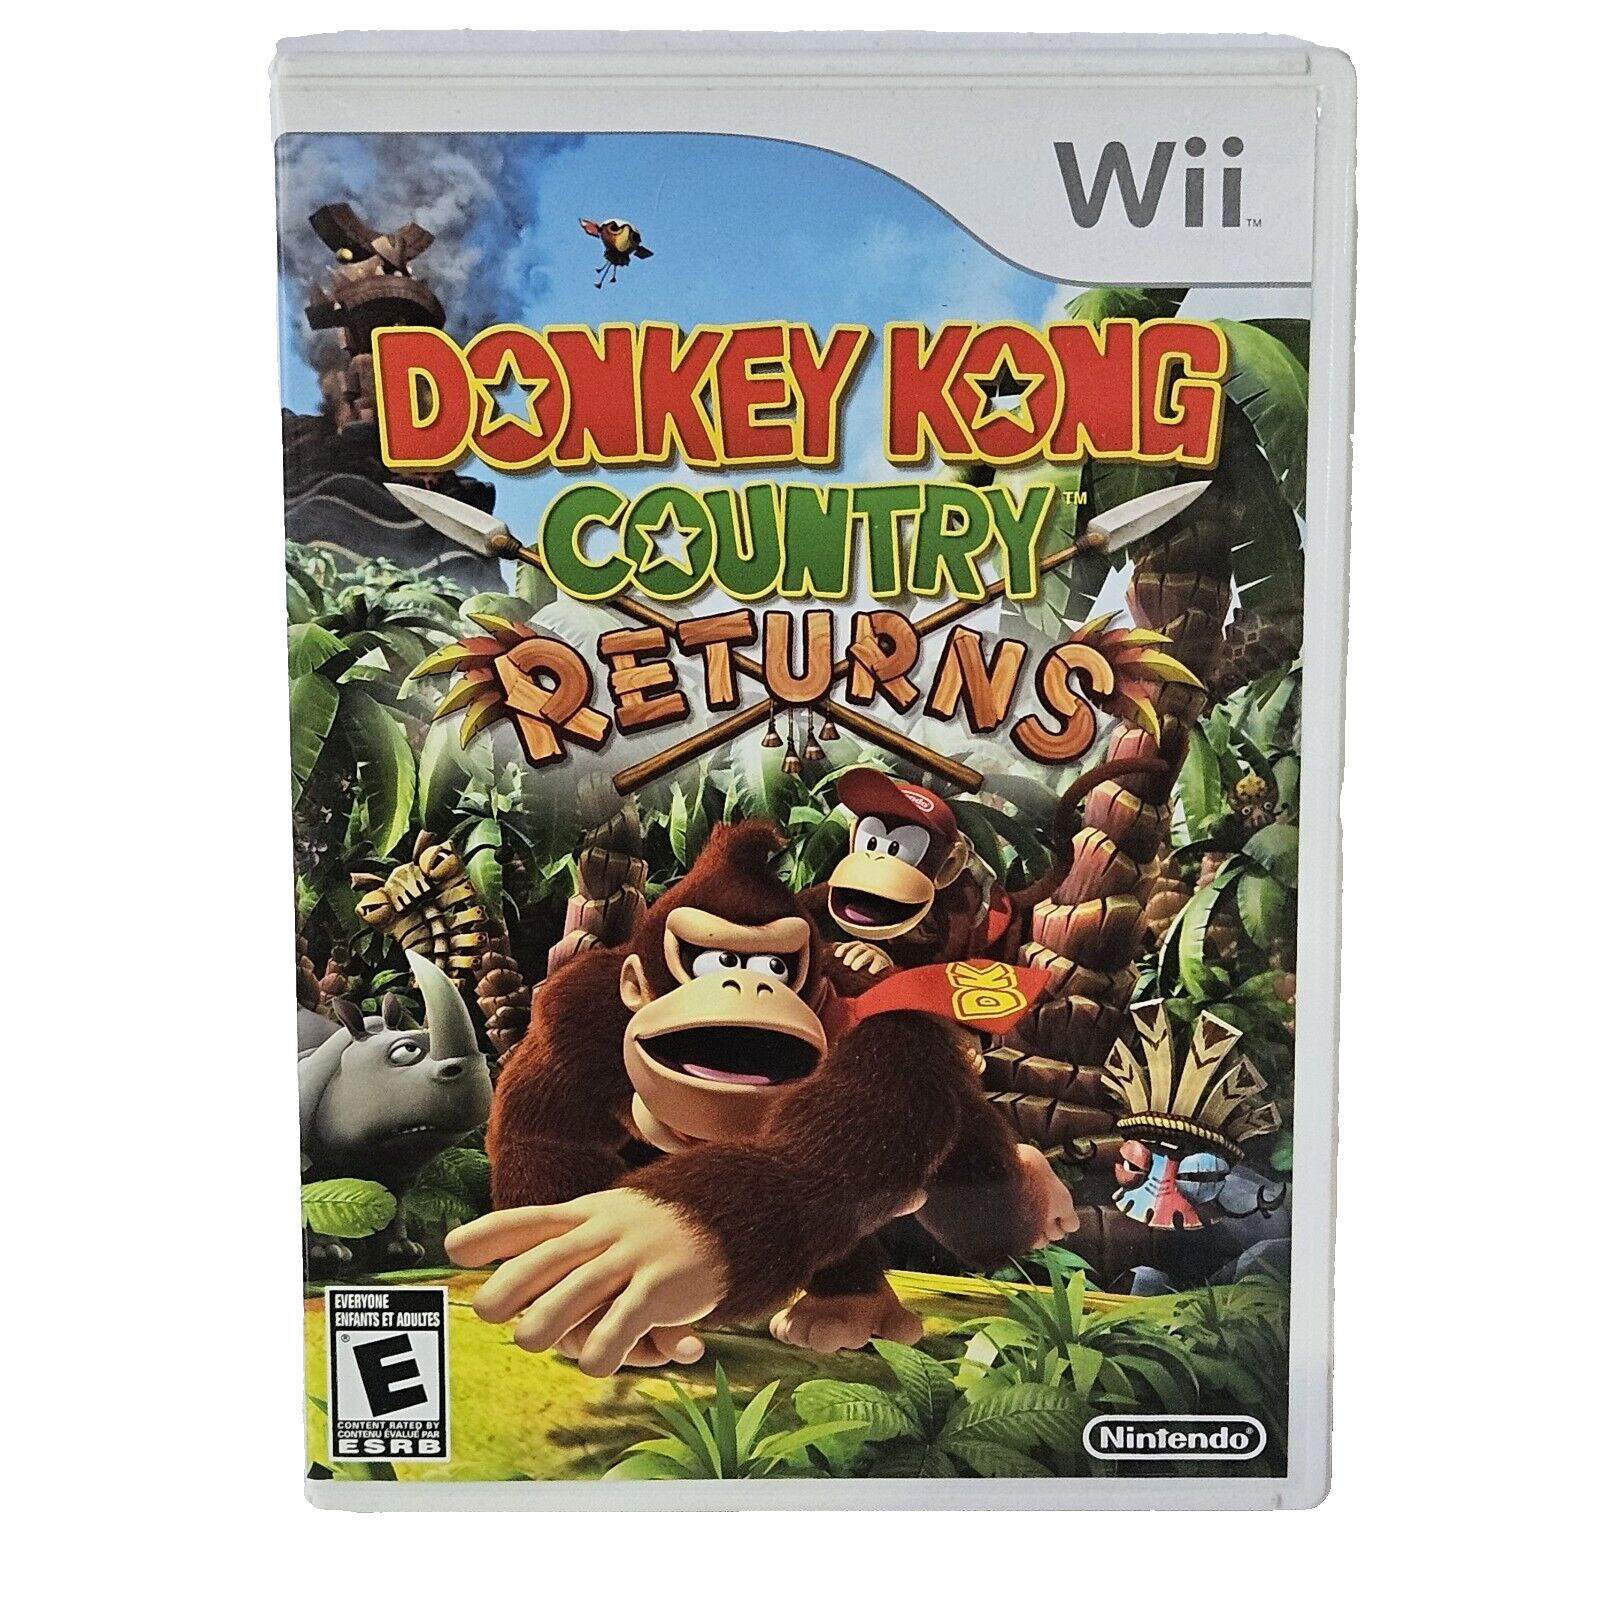 Nintendo Donkey Kong Country Returns Nintendo Wii 2010 Case and Disc Only - $12.16